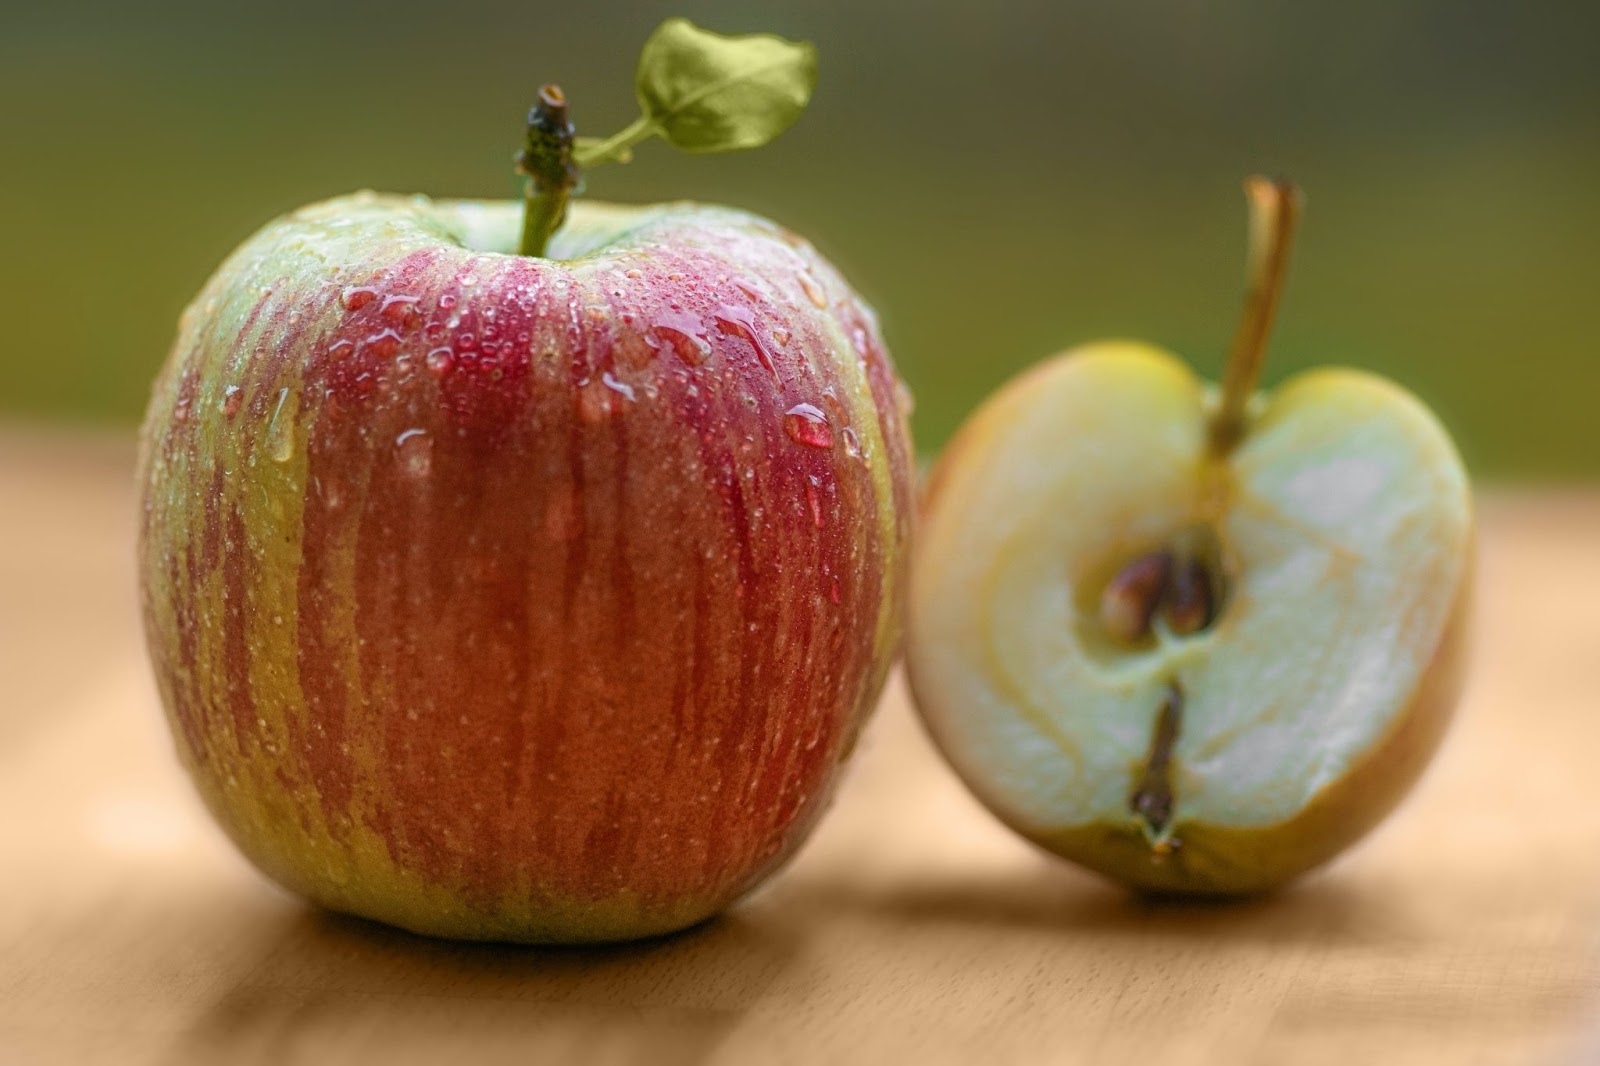  apple variety that has a stronger flavor profile